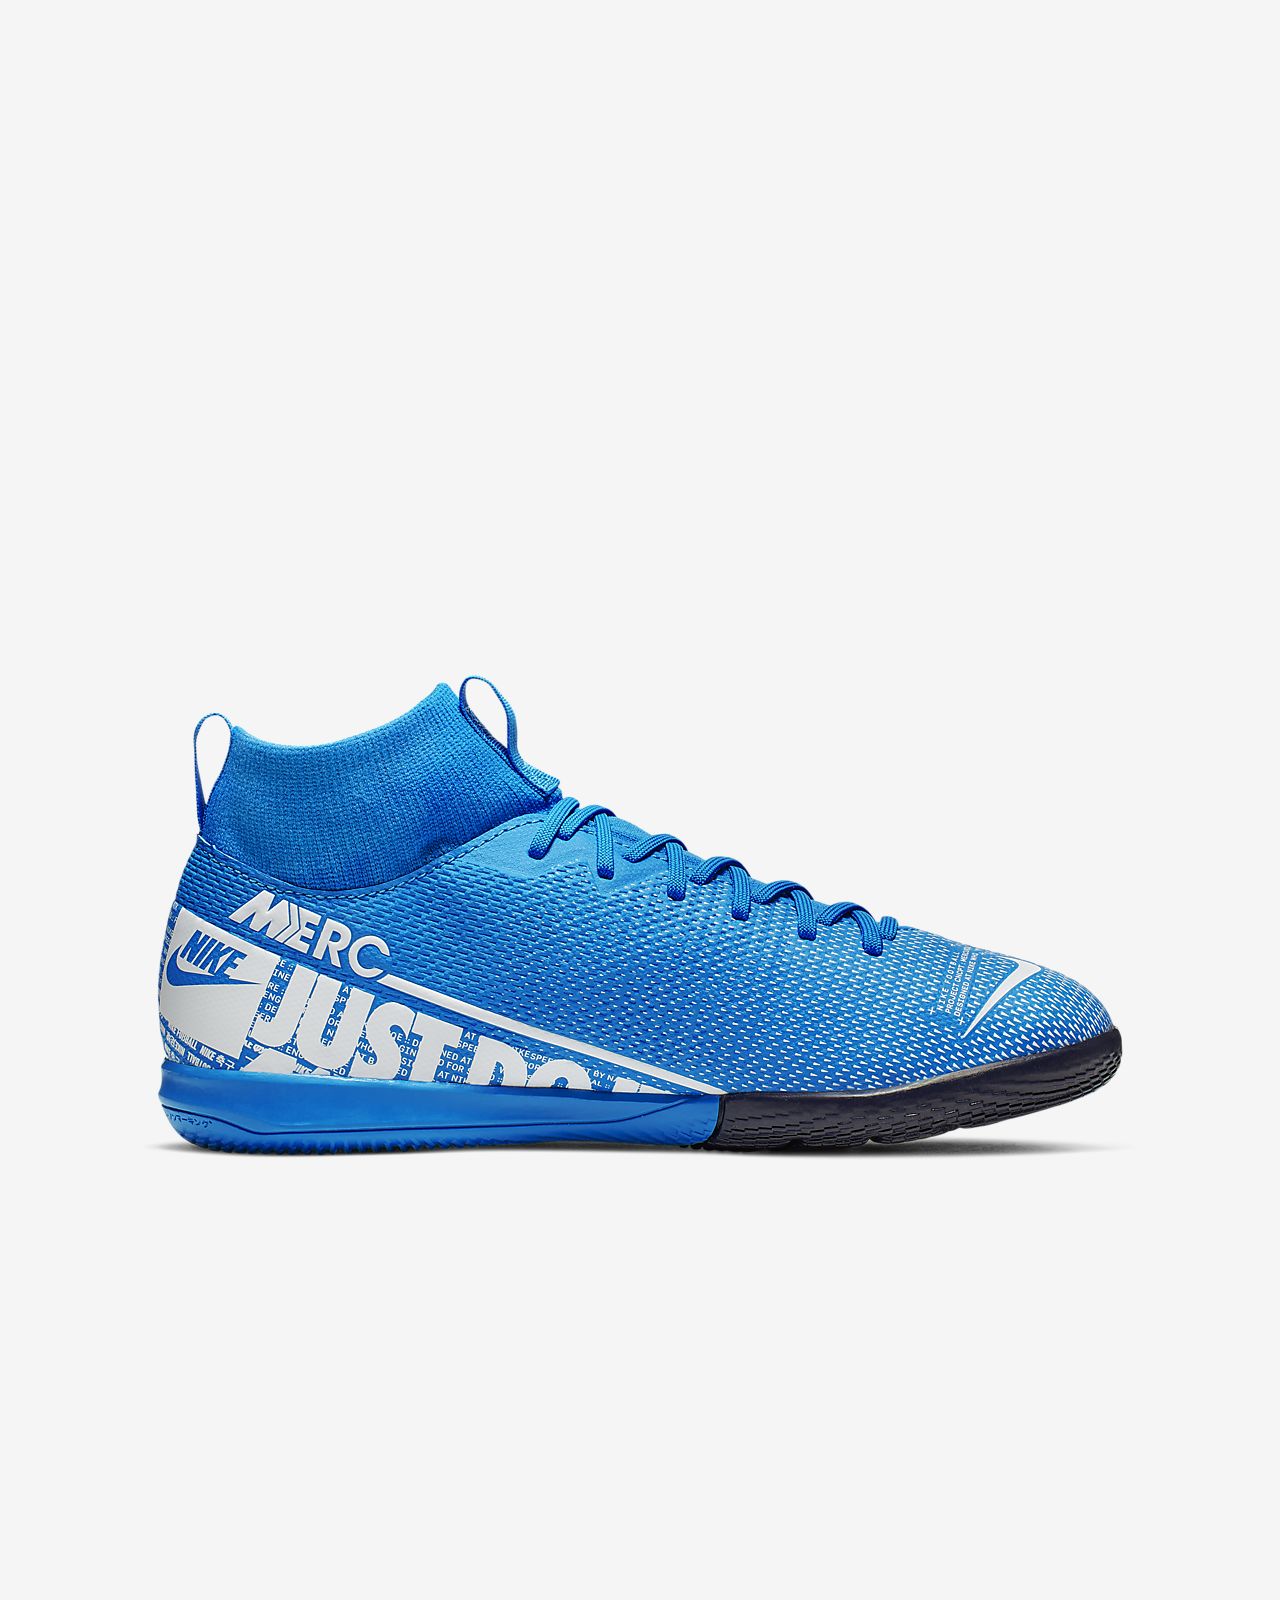 Nike Mercurial Superfly 7 Academy TF Under The. YouTube